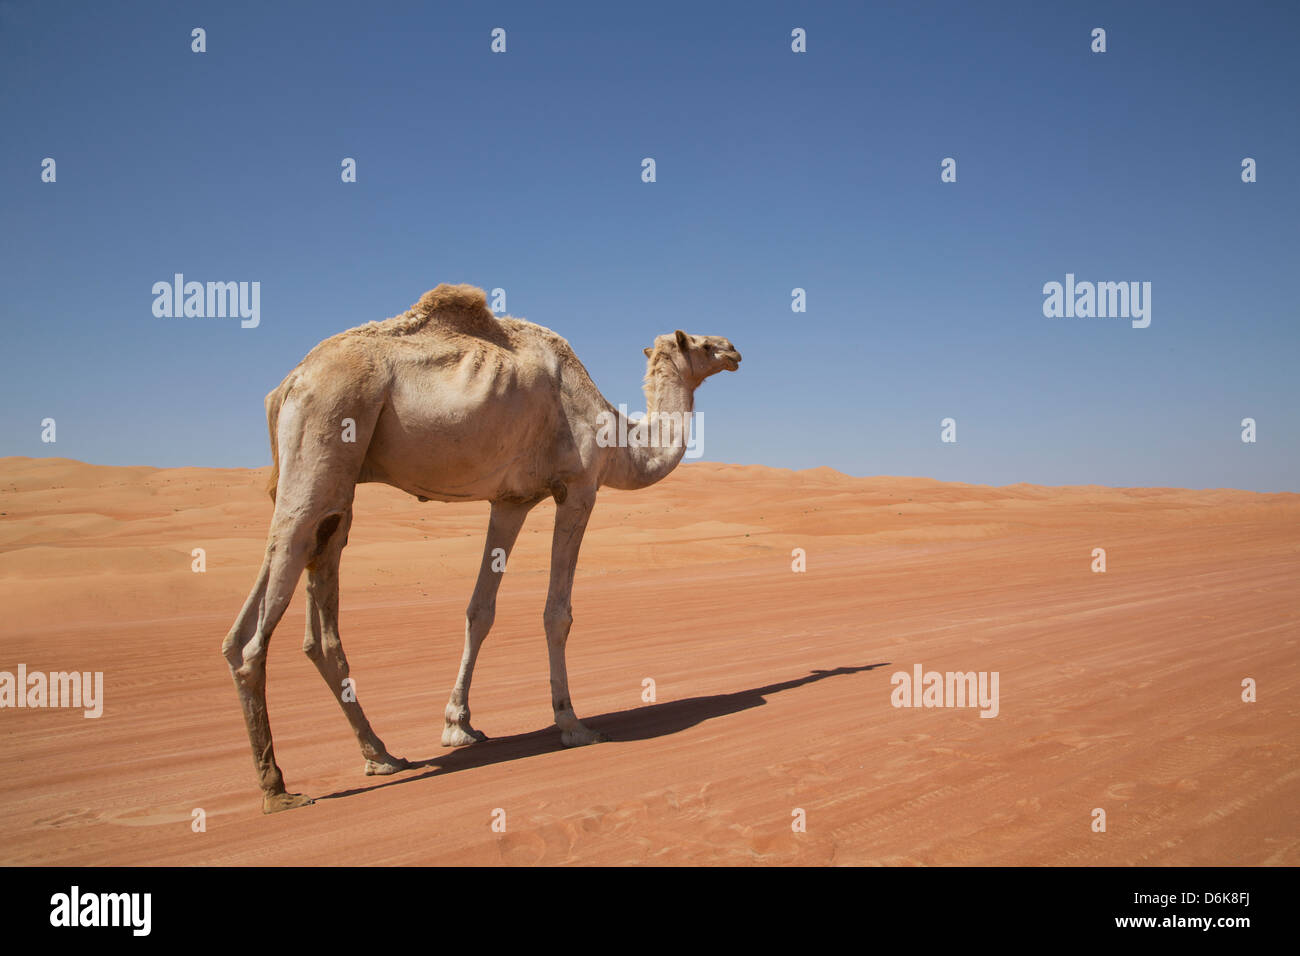 Camel in the desert, Wahiba, Oman, Middle East Stock Photo